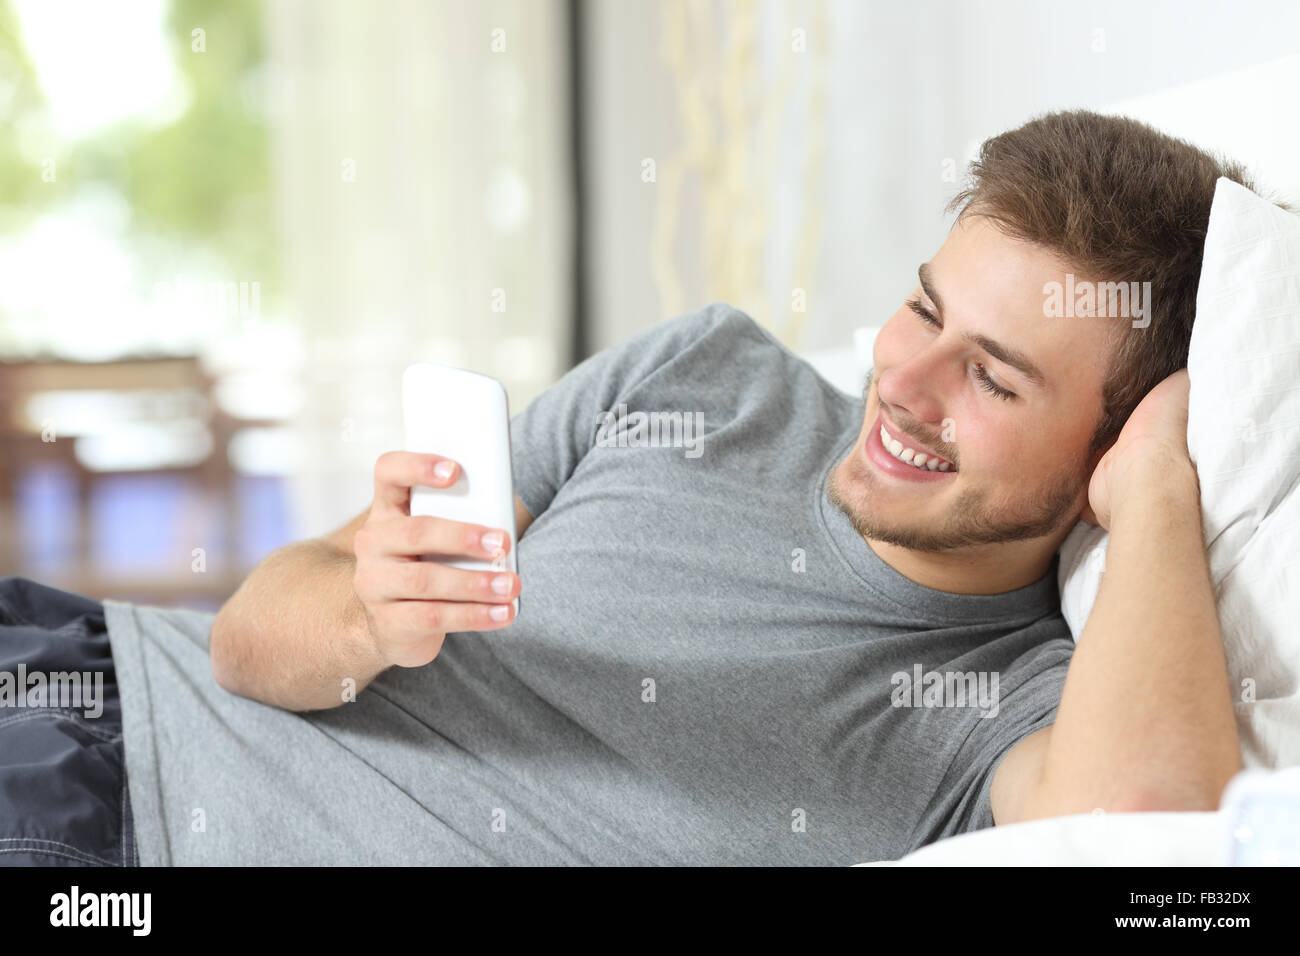 Relaxed casual man using a smart phone lying on the bed at home Stock Photo